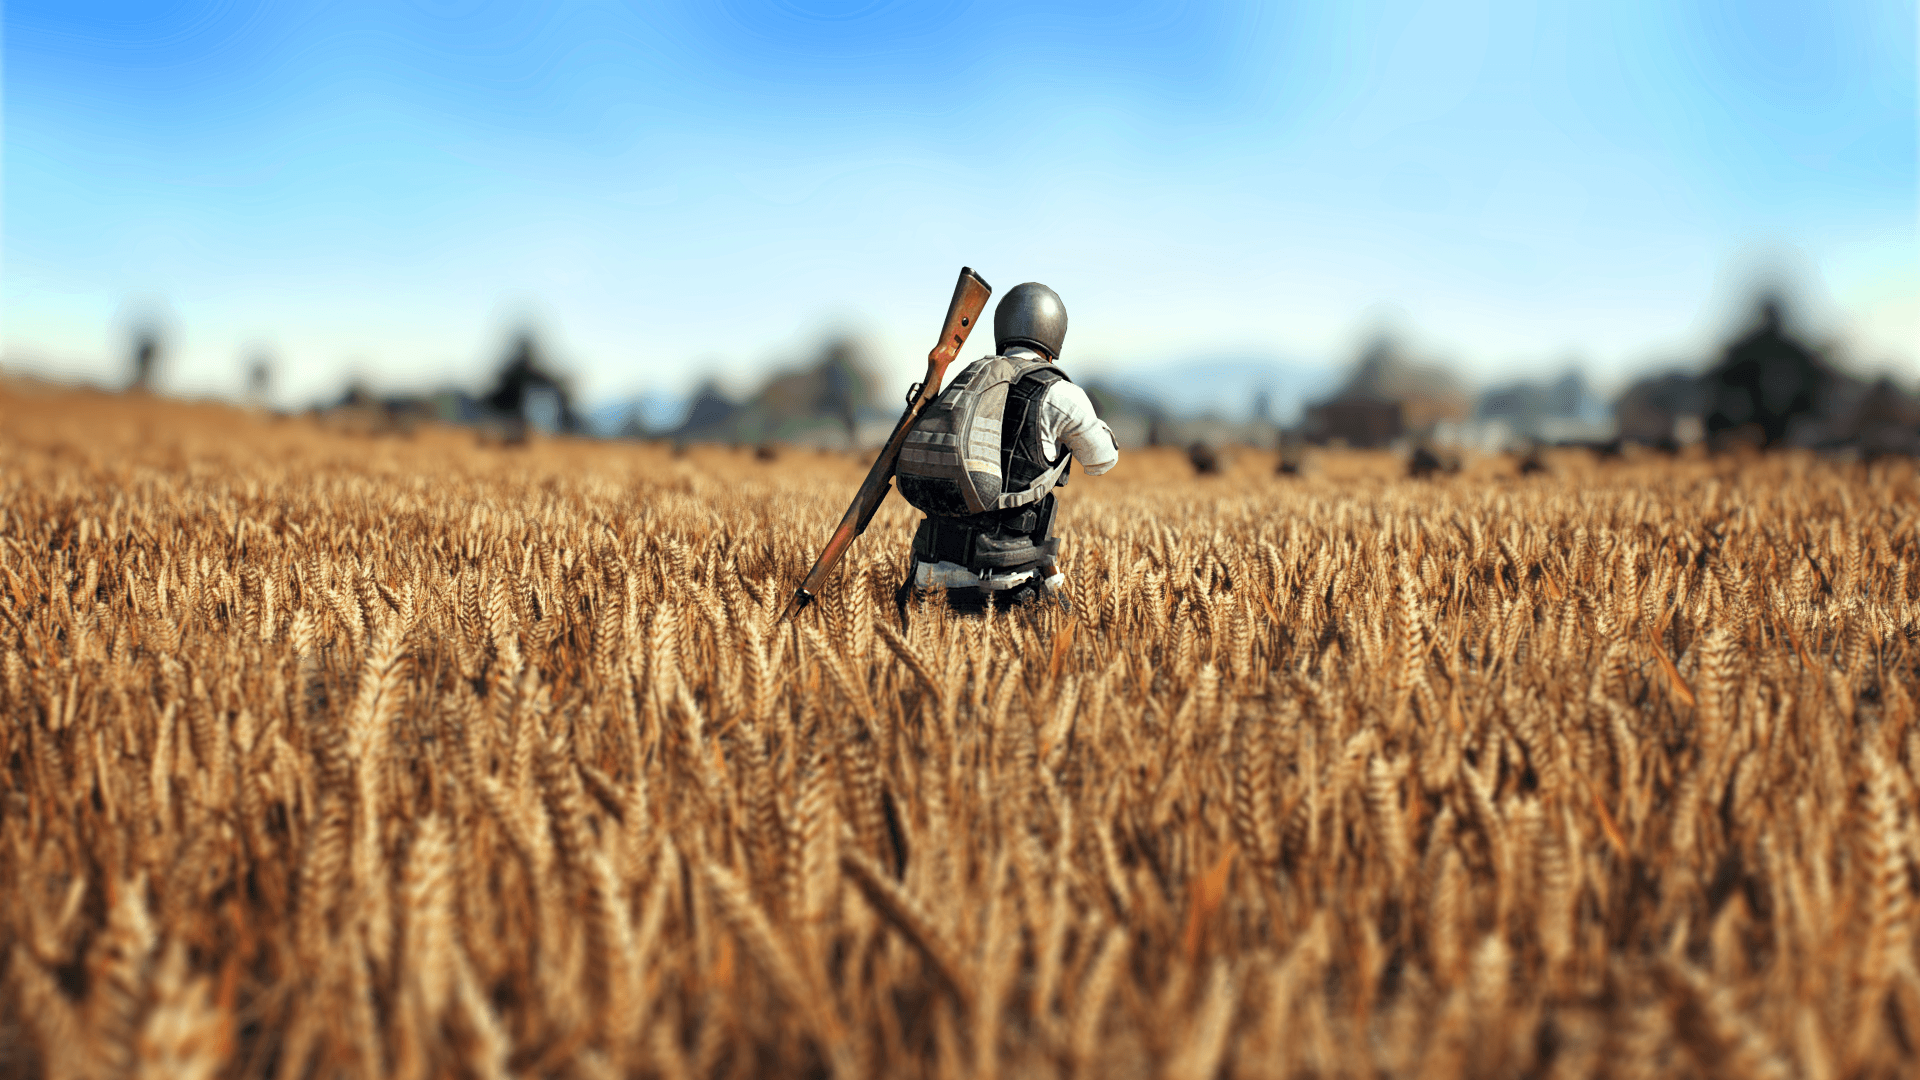 Pubg Wallpapers Photo » Gamers Wallpapers 1080p